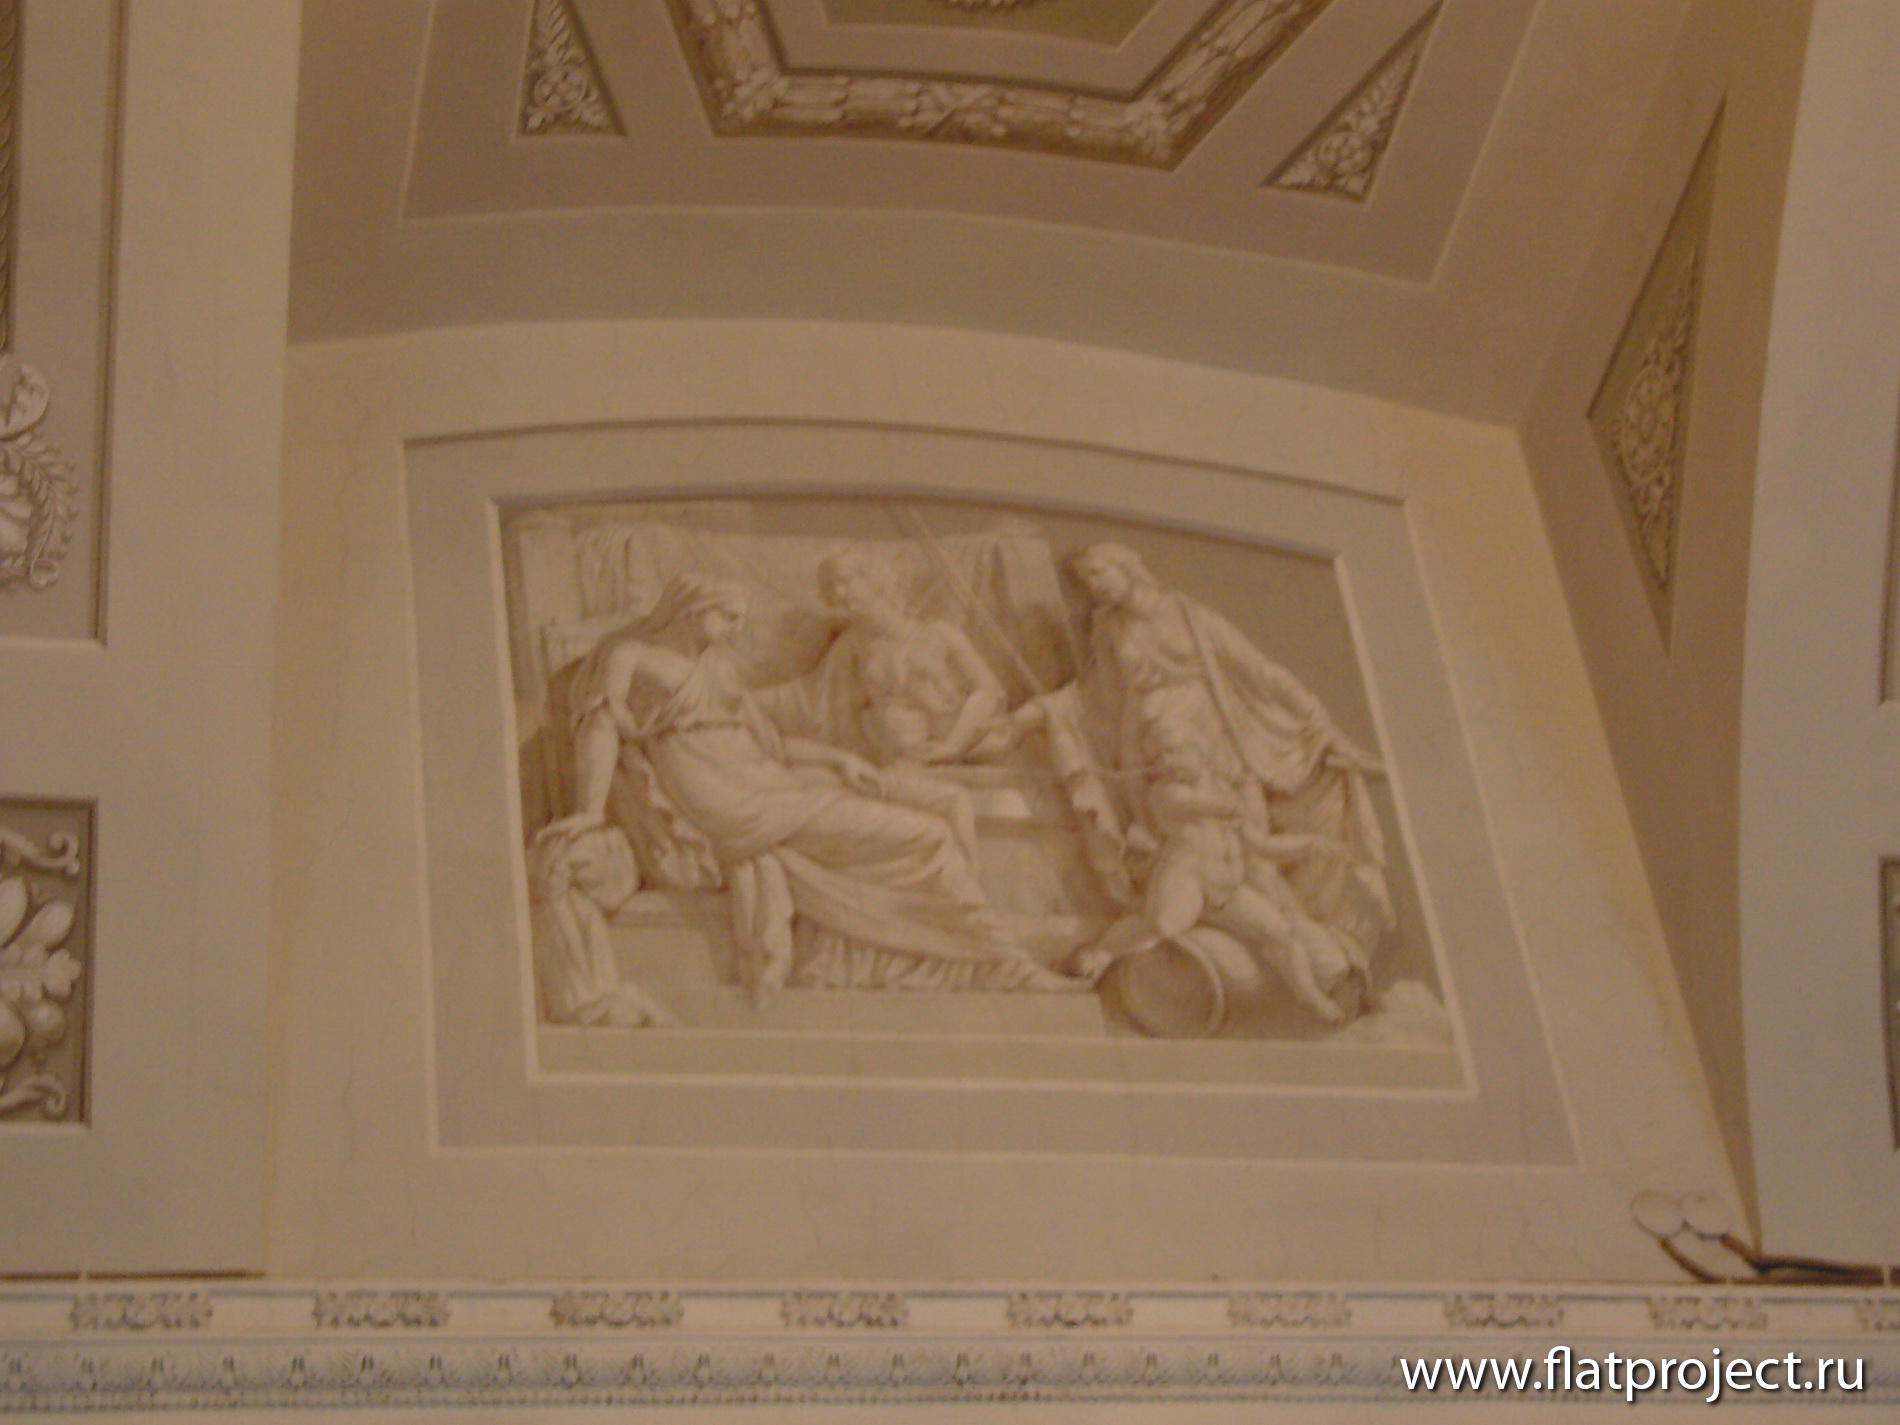 The State Russian museum interiors – photo 135